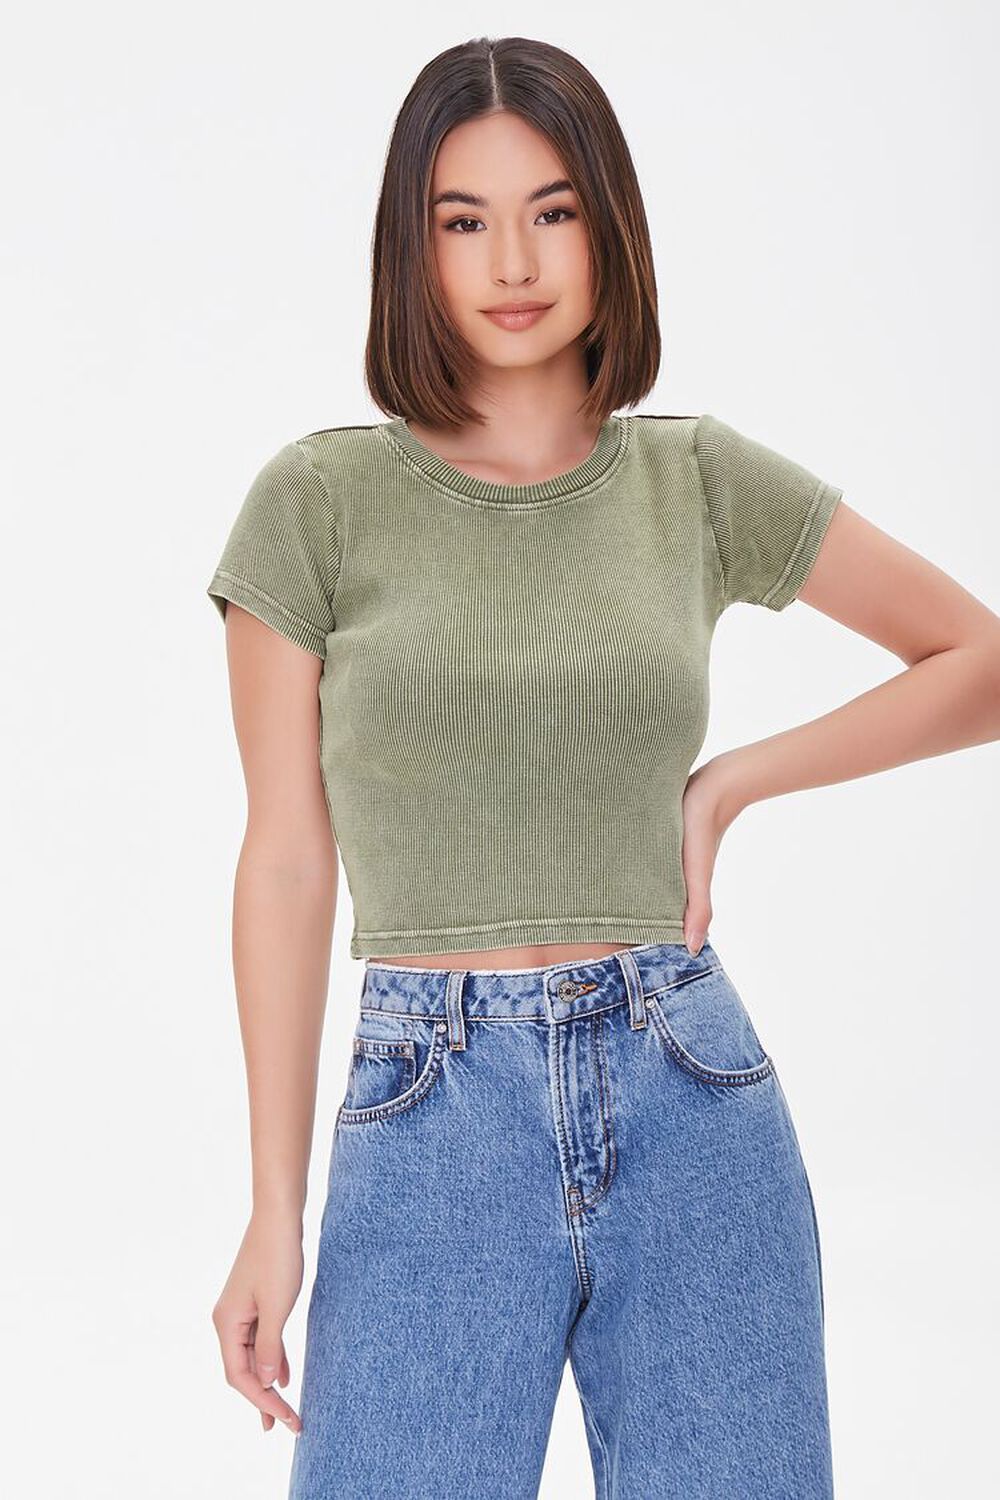 OLIVE Mineral Wash Cropped Tee, image 1